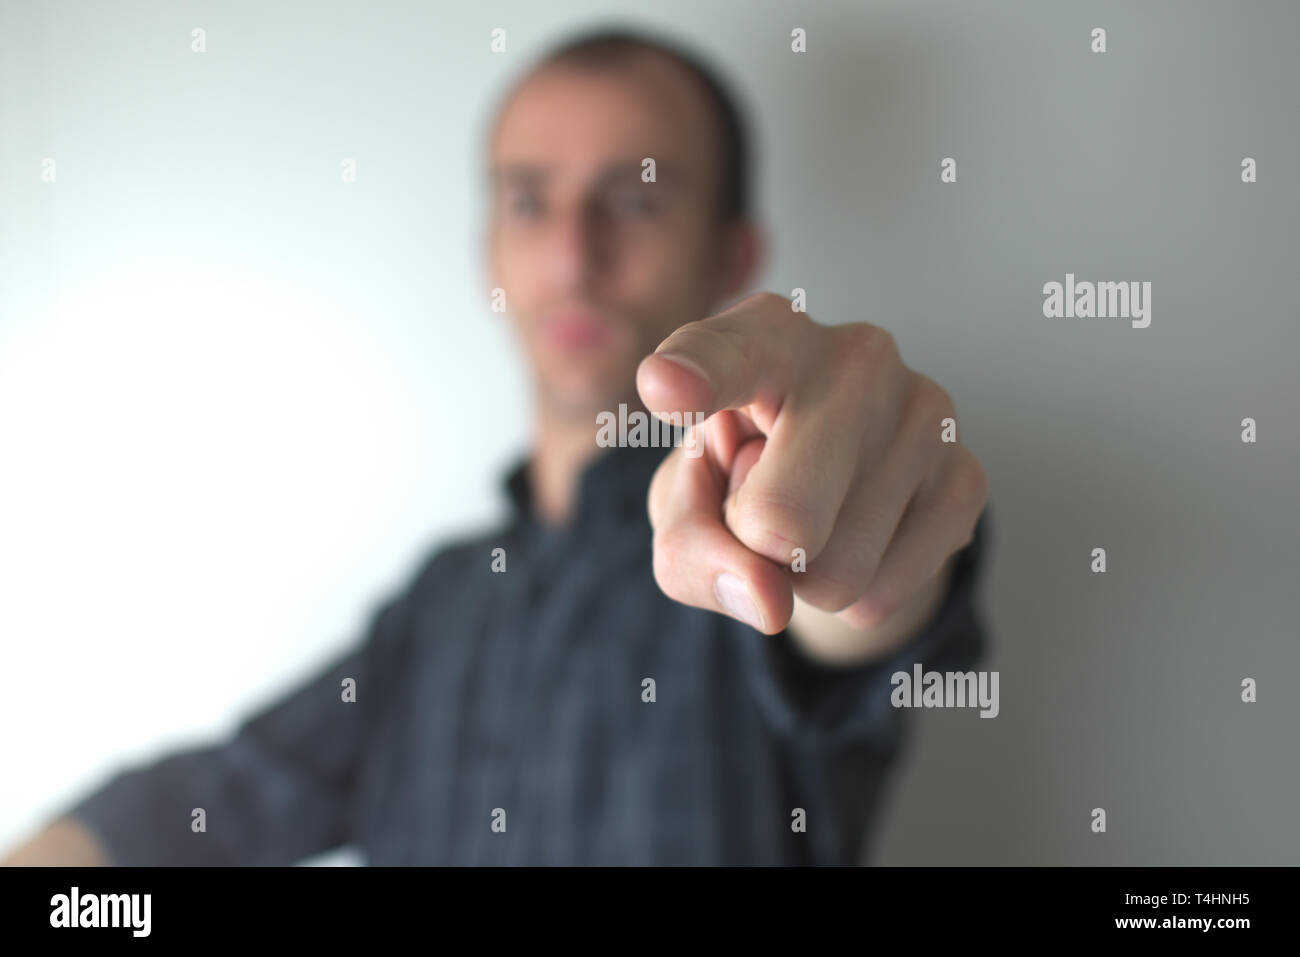 A man on black shirt pointing toward the viewer. Stock Photo